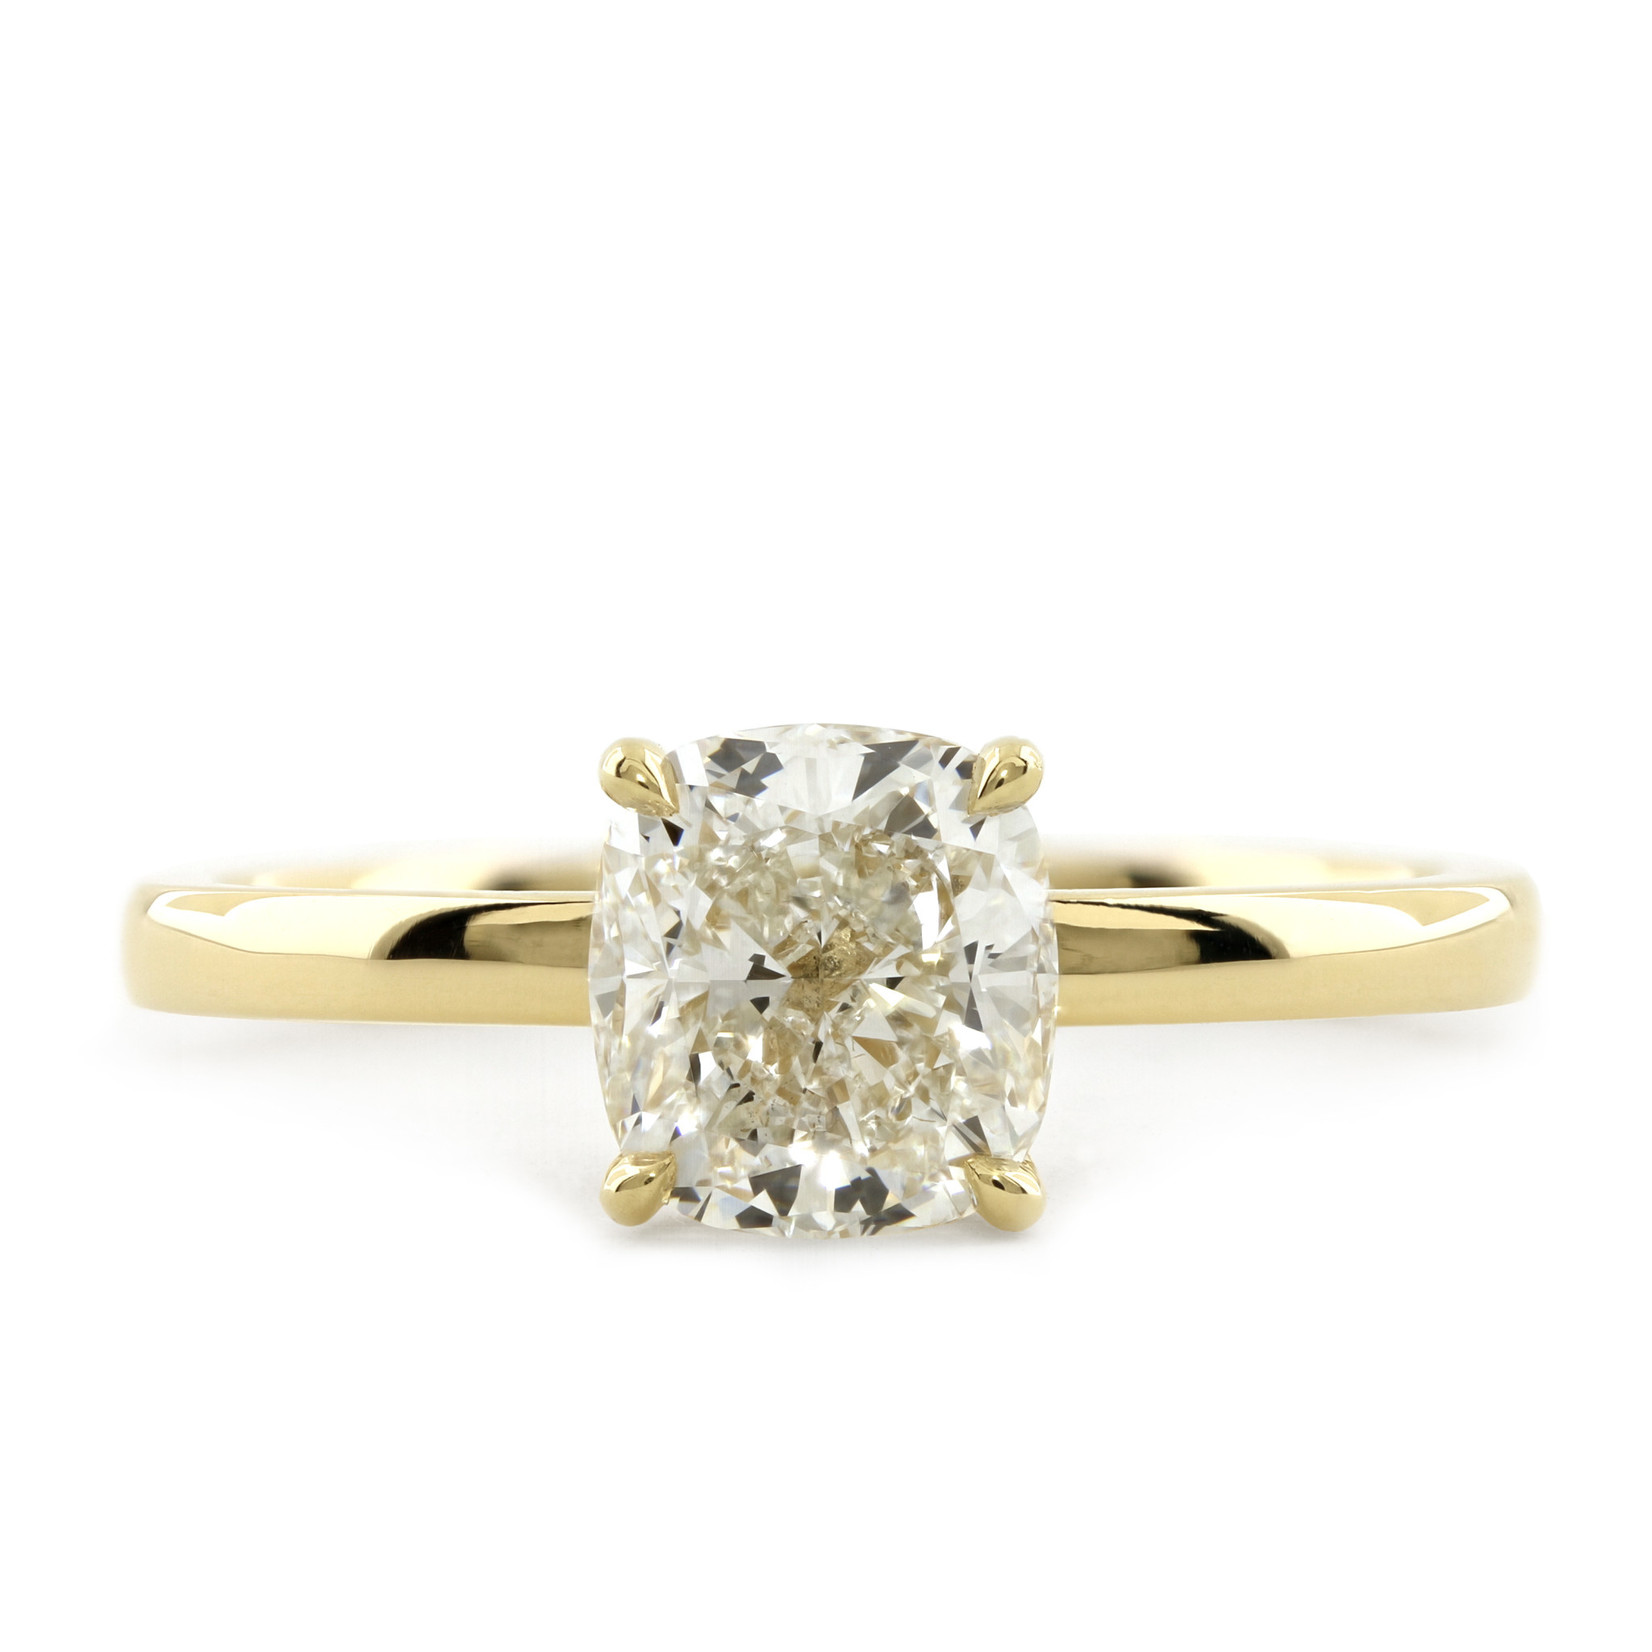 Baxter Moerman Chelsea Engagement Ring with Cushion Diamond